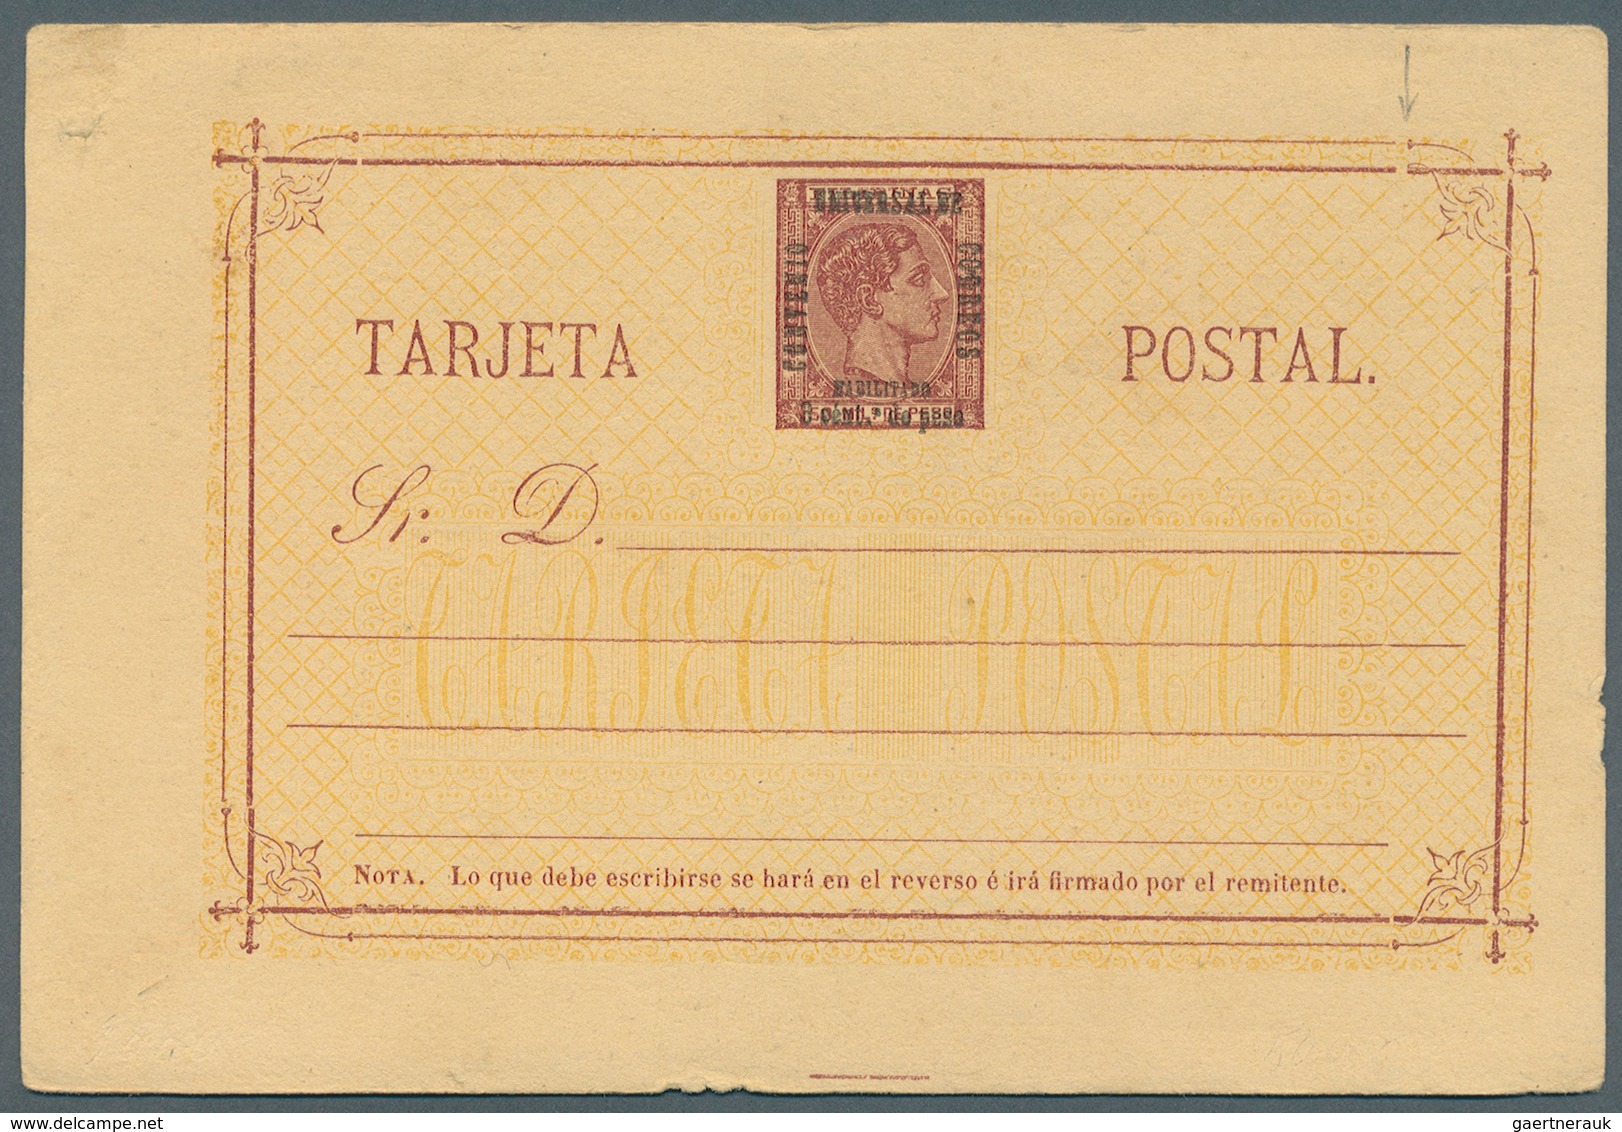 Philippinen: 1880 UPU surcharge 3c/50c, tied by oval cancel of crosses in association with Manila di